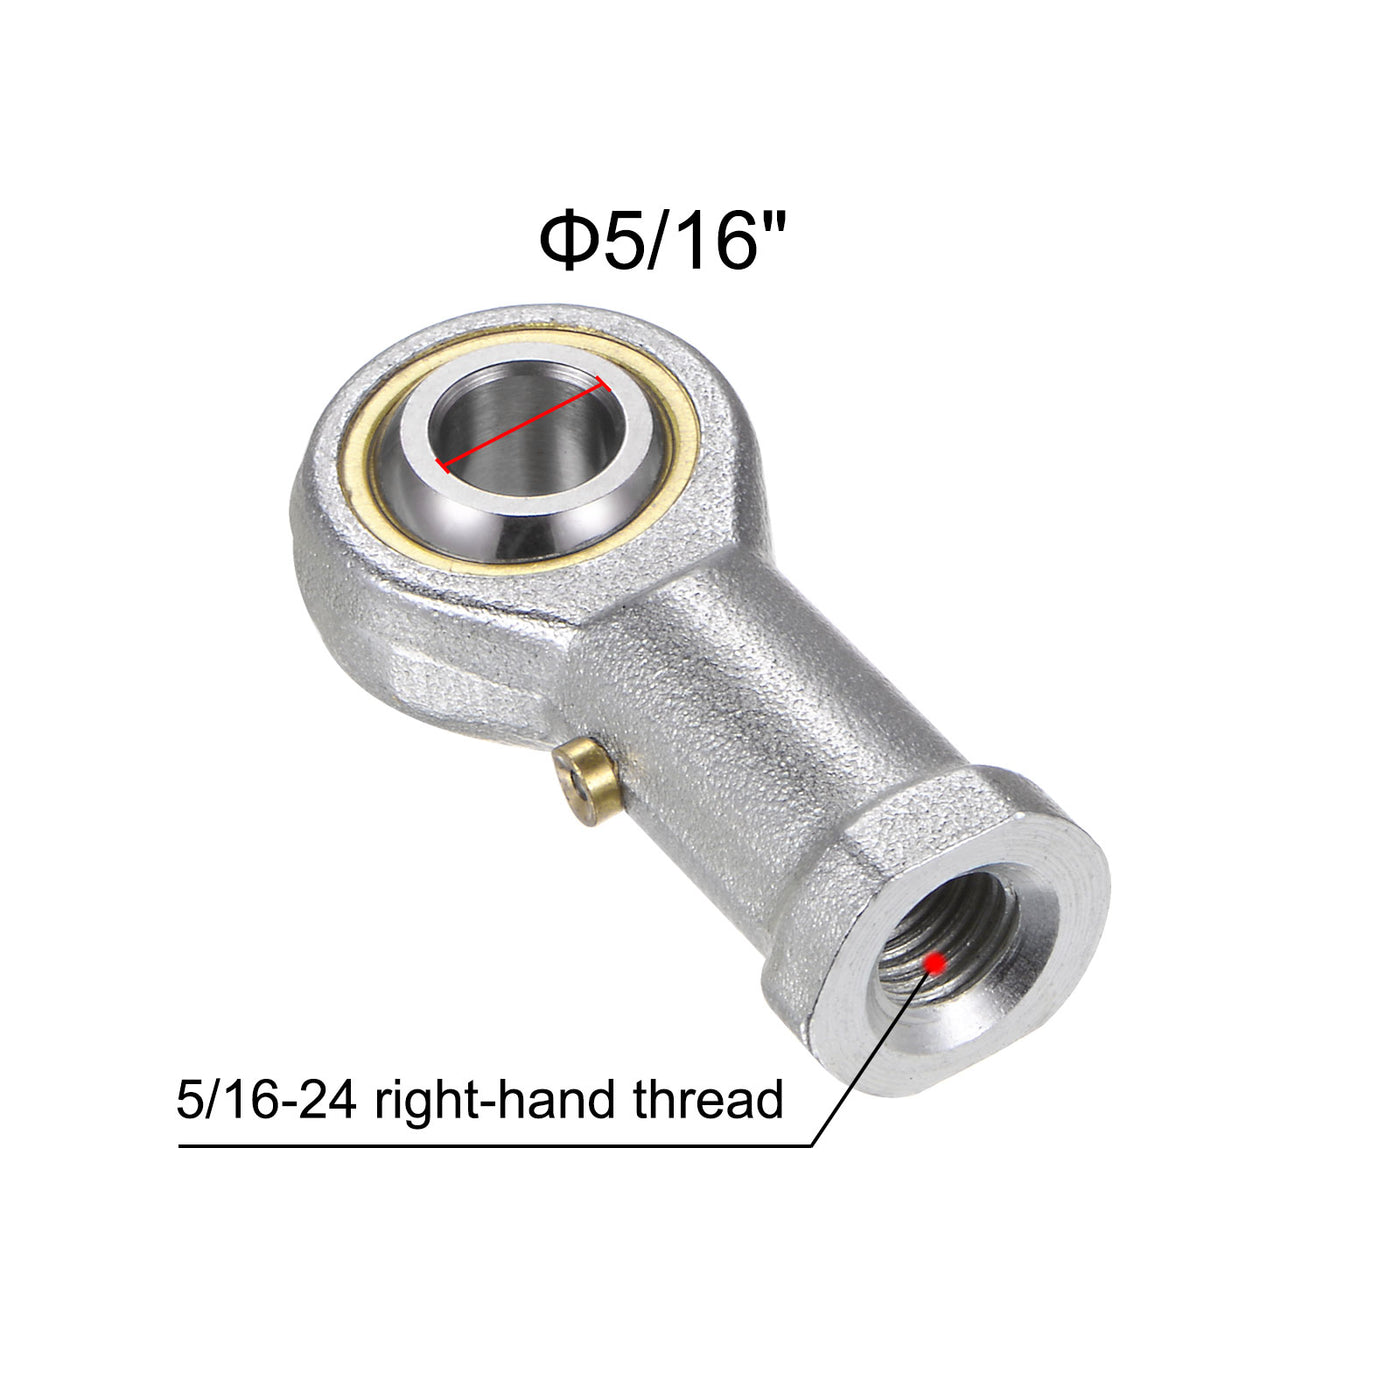 uxcell Uxcell 2pcs PHSB5 Female Rod End 5/16" Bore and 5/16-24 Right Hand Thread with Jam Nut